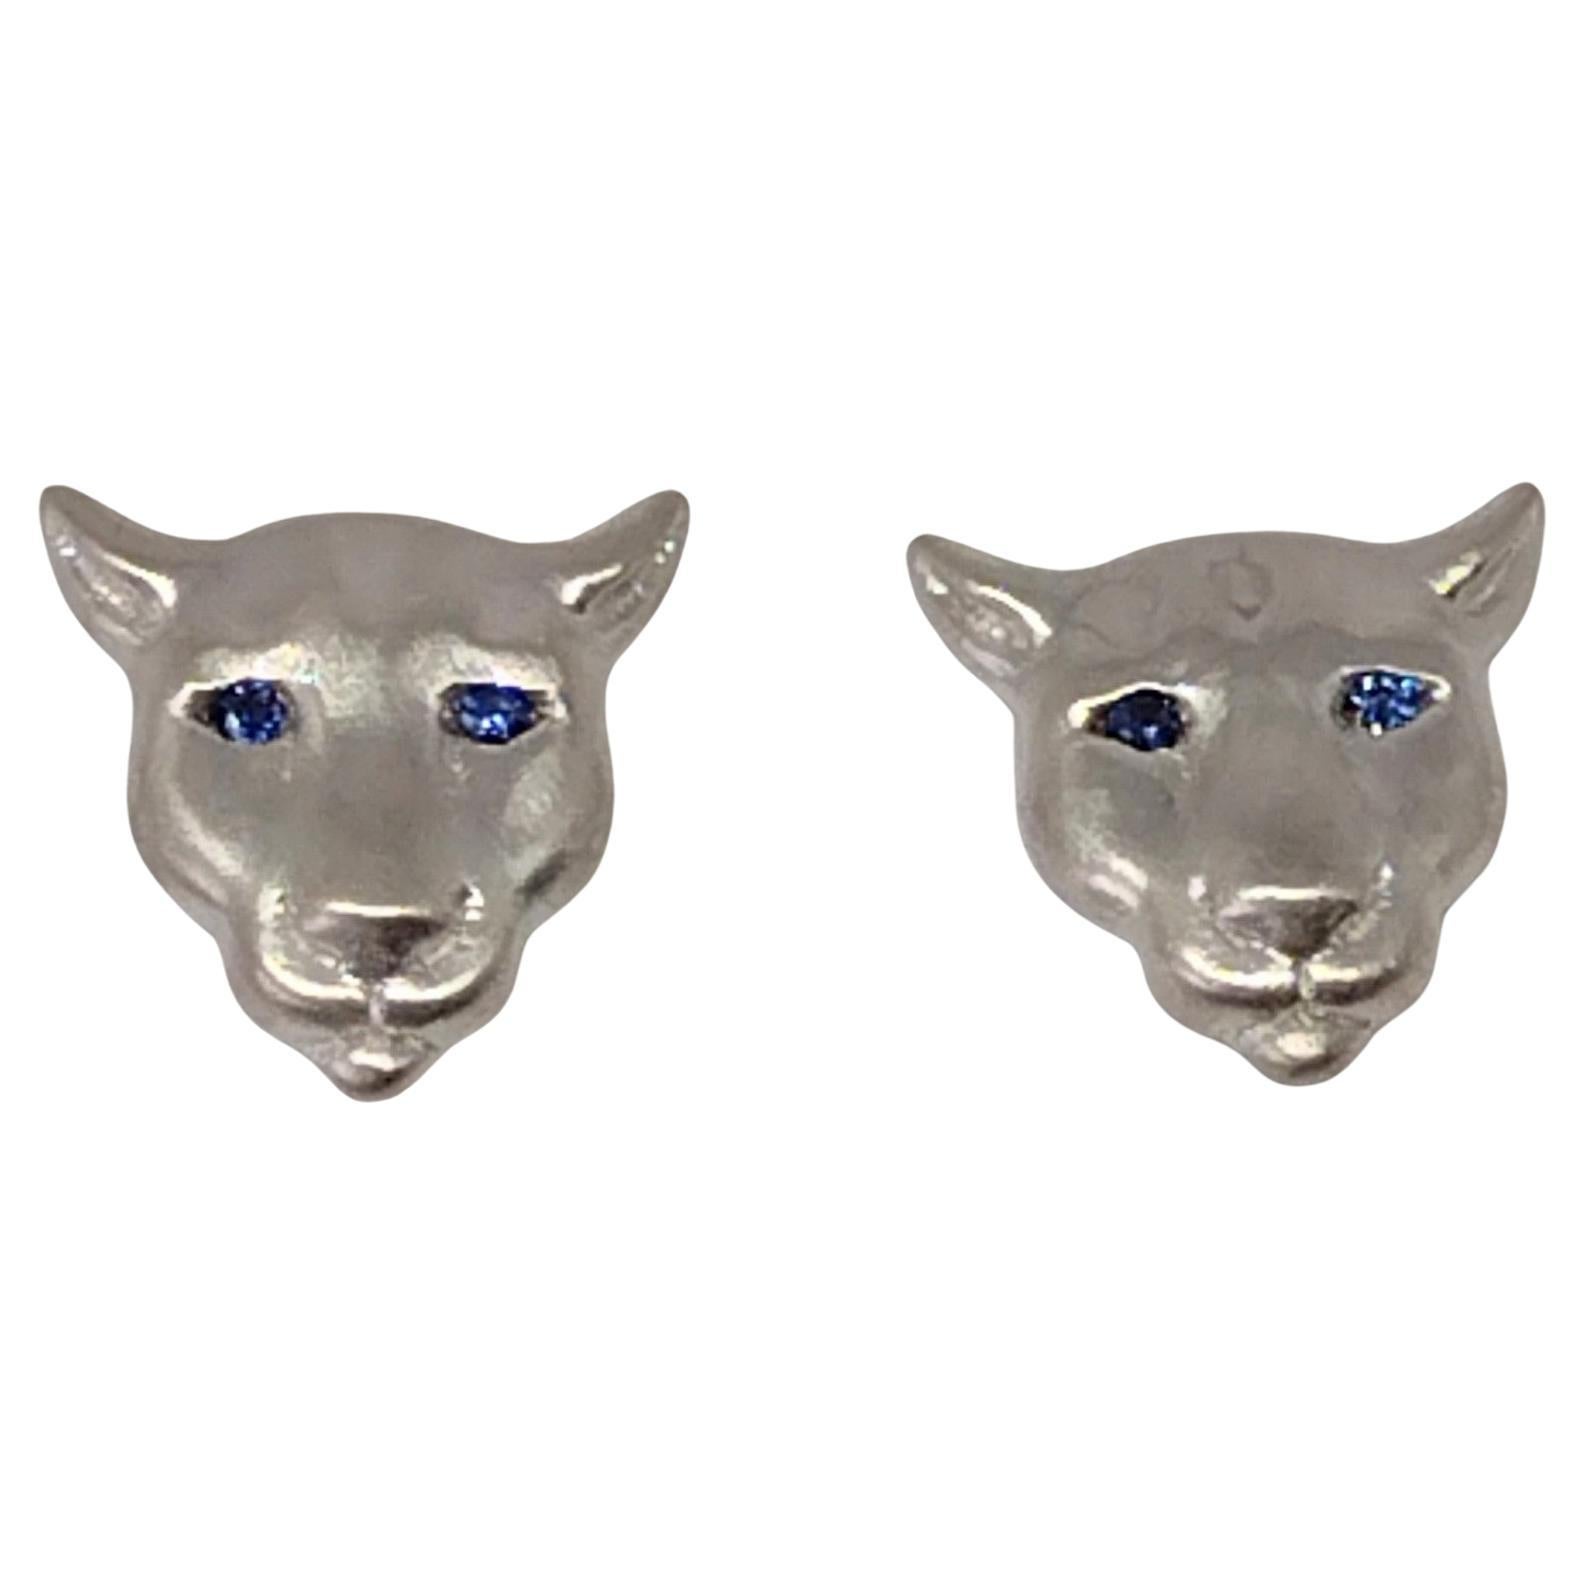 Platinum and Sapphire Eyes Colorado Cougar Stud Earrings